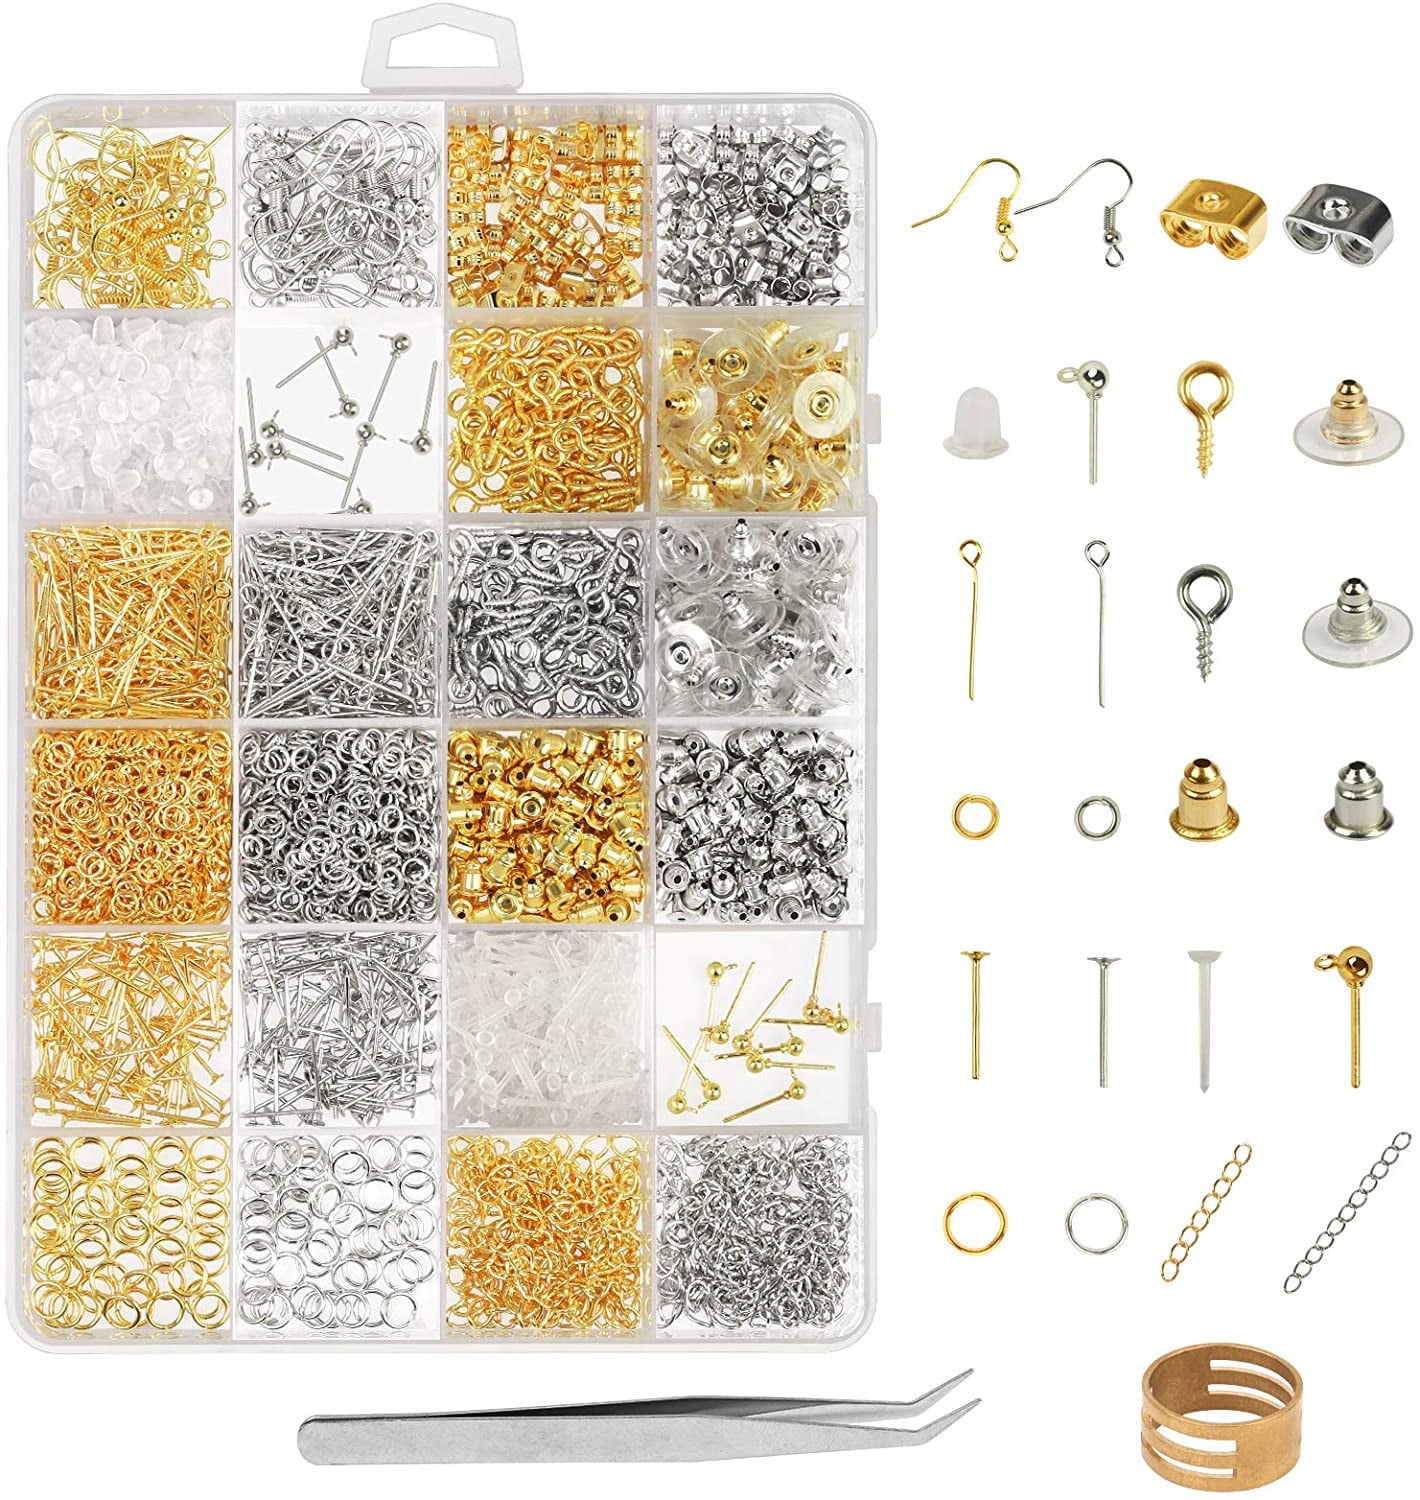 Earring Making Supplies, Paxcoo 1350pcs Earring Making Kit with Earring  Hooks, Jump Rings, Pliers, Earring Backs, Earrings Holder Cards and Clear  Bags for DIY Earring Supplies and Earring Findings